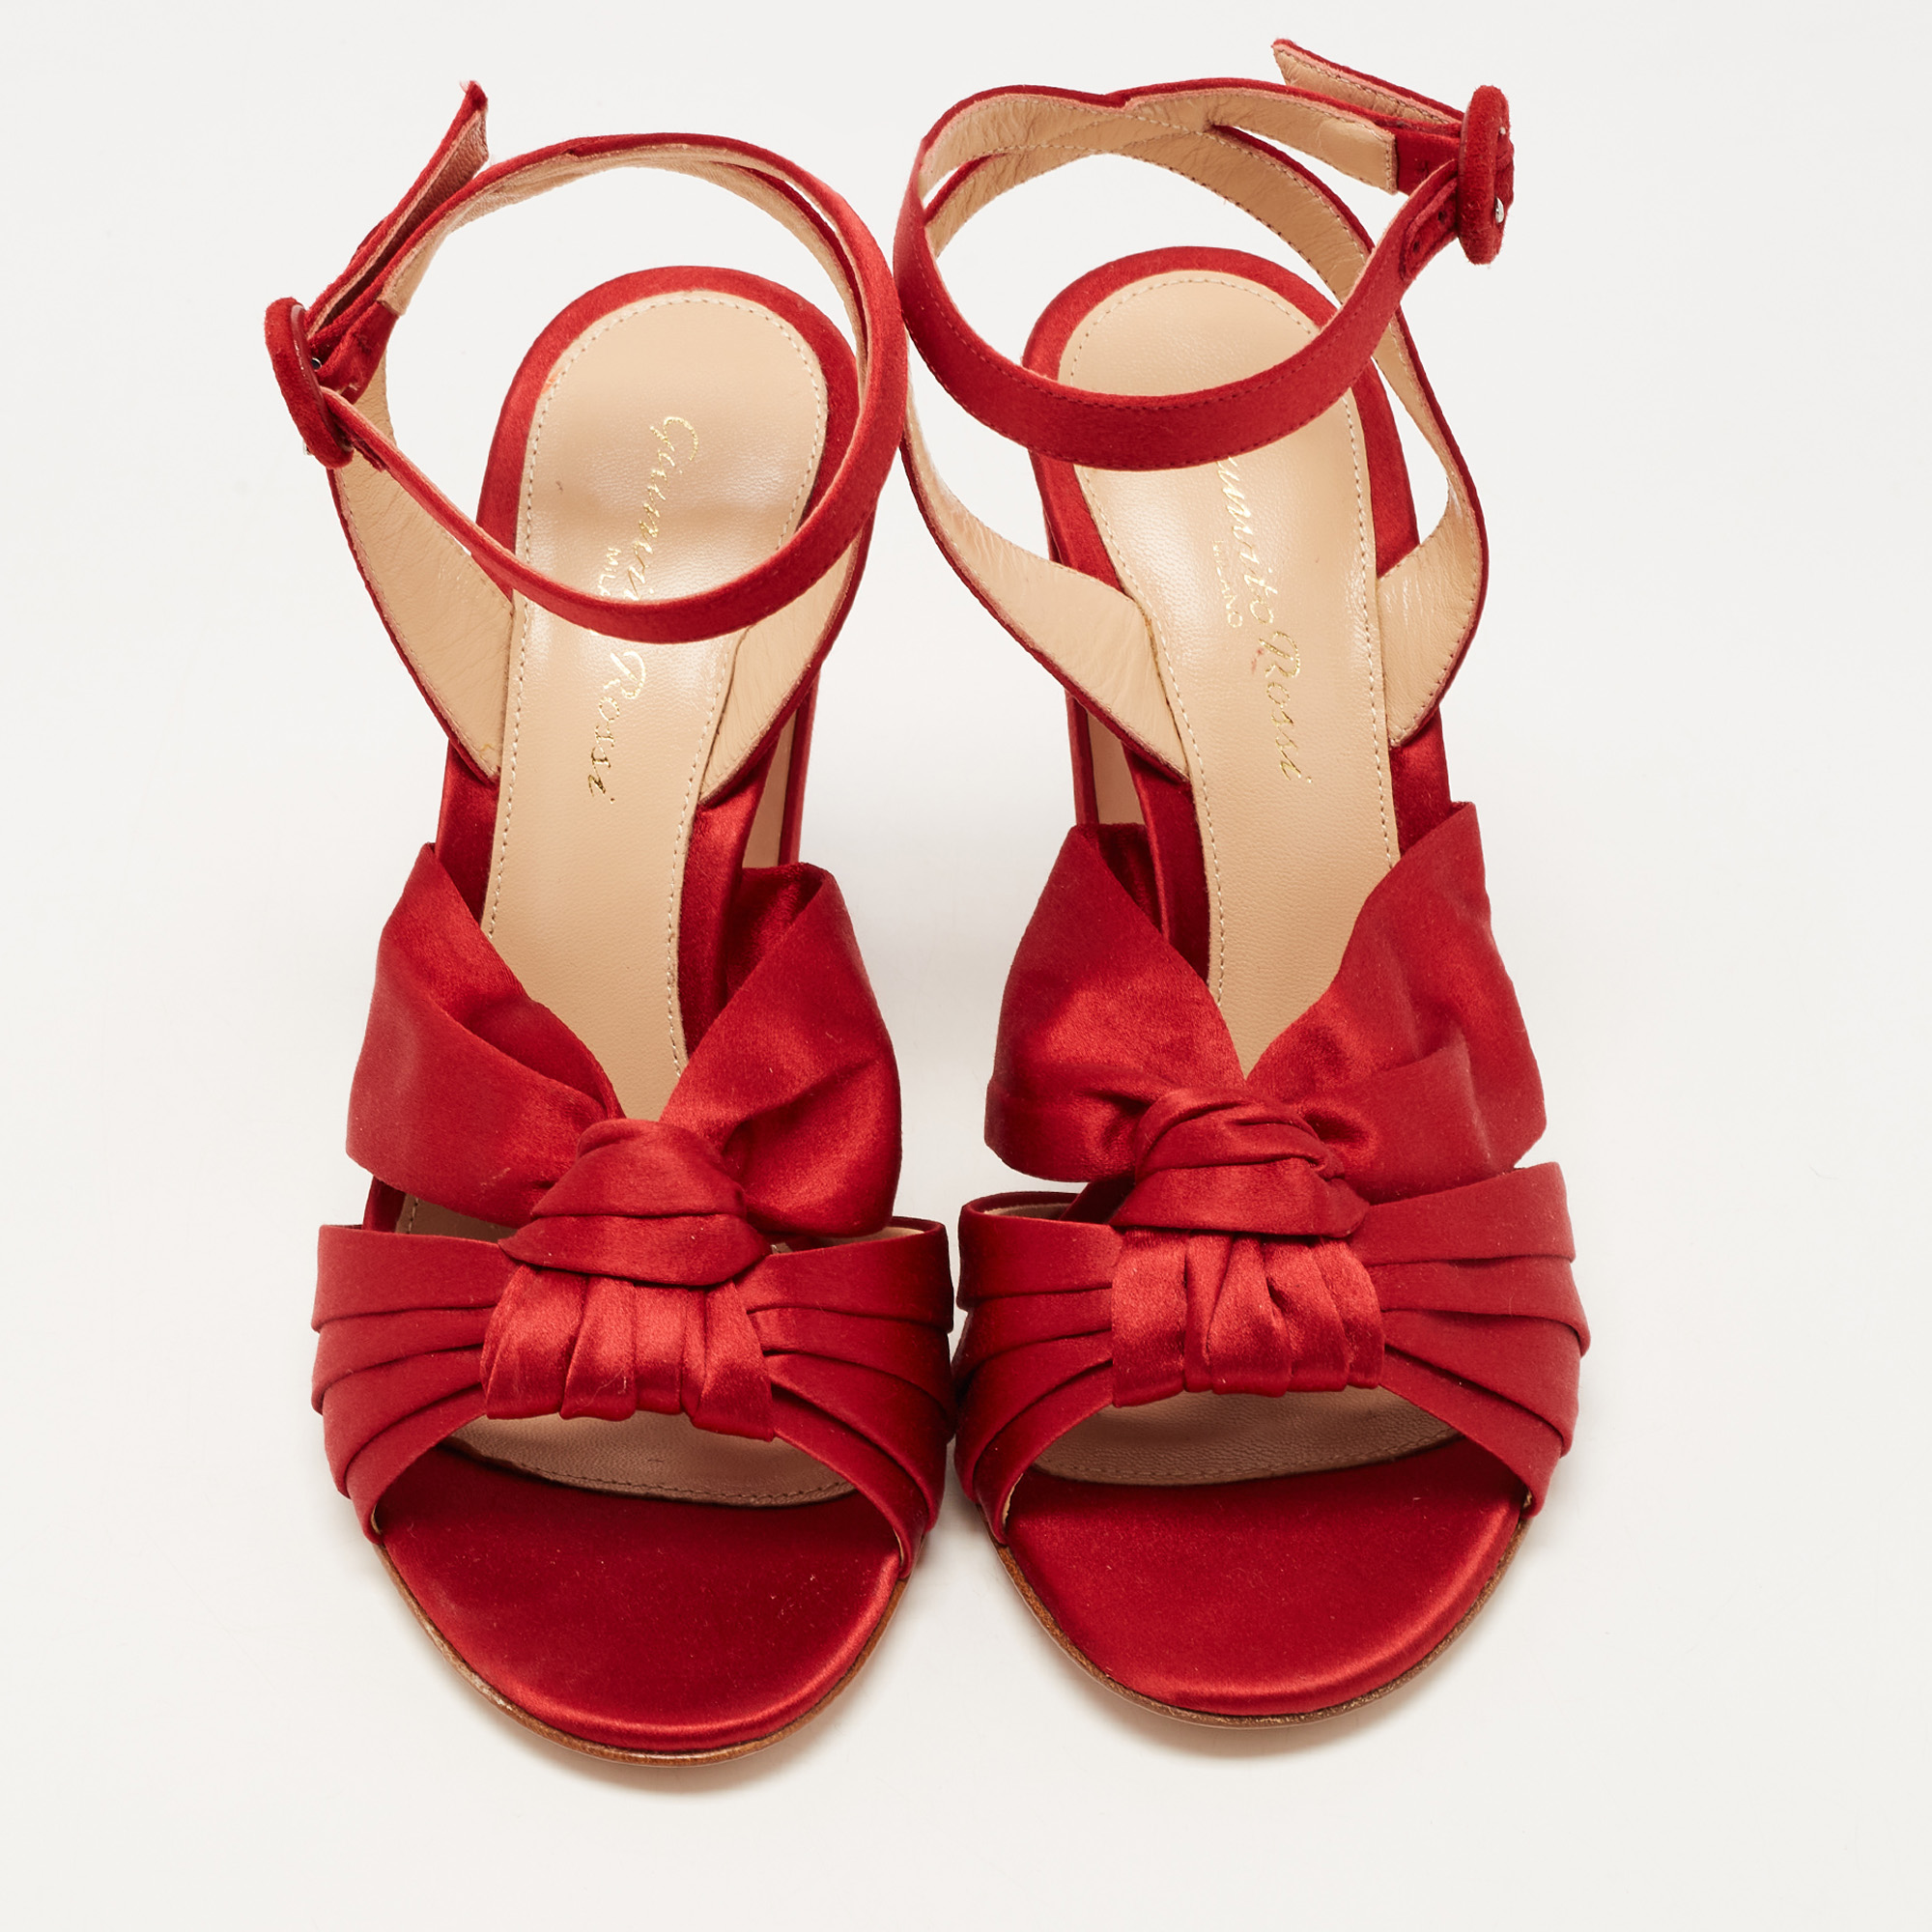 Gianvito Rossi Red Satin Knot Ankle Strap Sandals Size 37.5